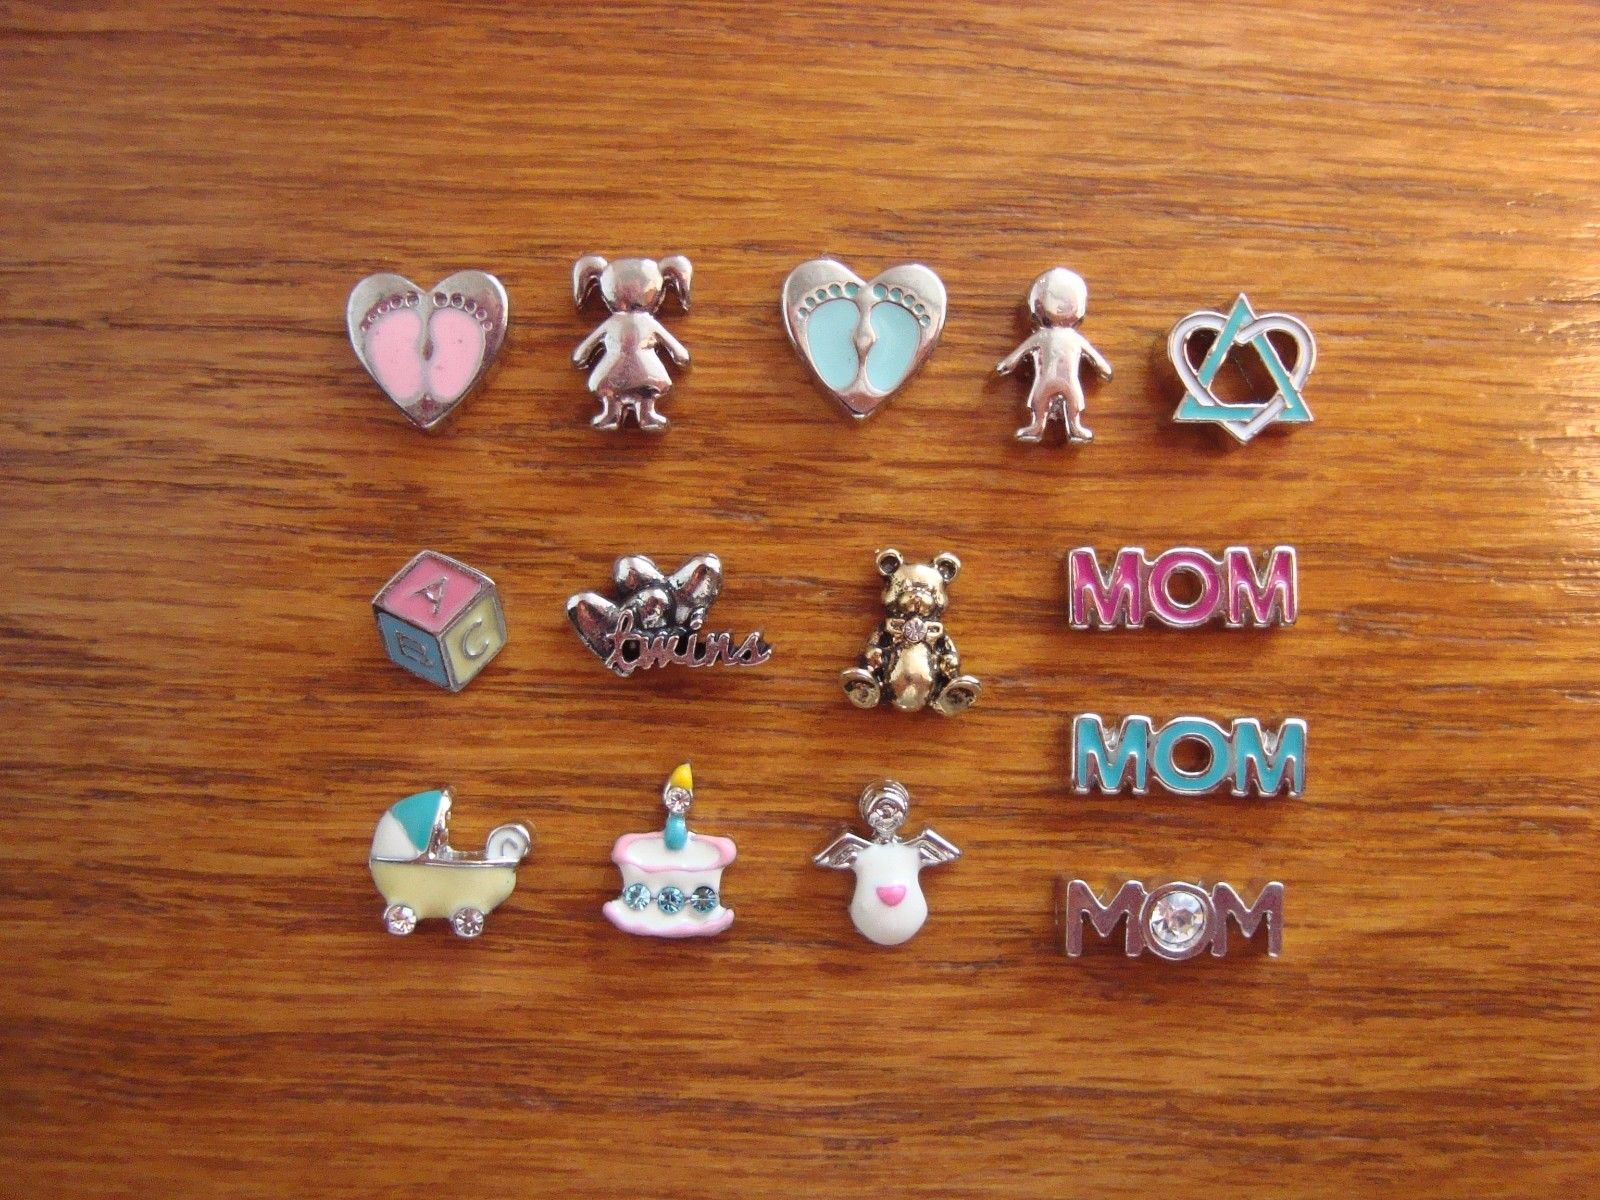 Disney Origami Owl Charms Authentic Origami Owl Your Choice Of Charms Batoddlermom 6